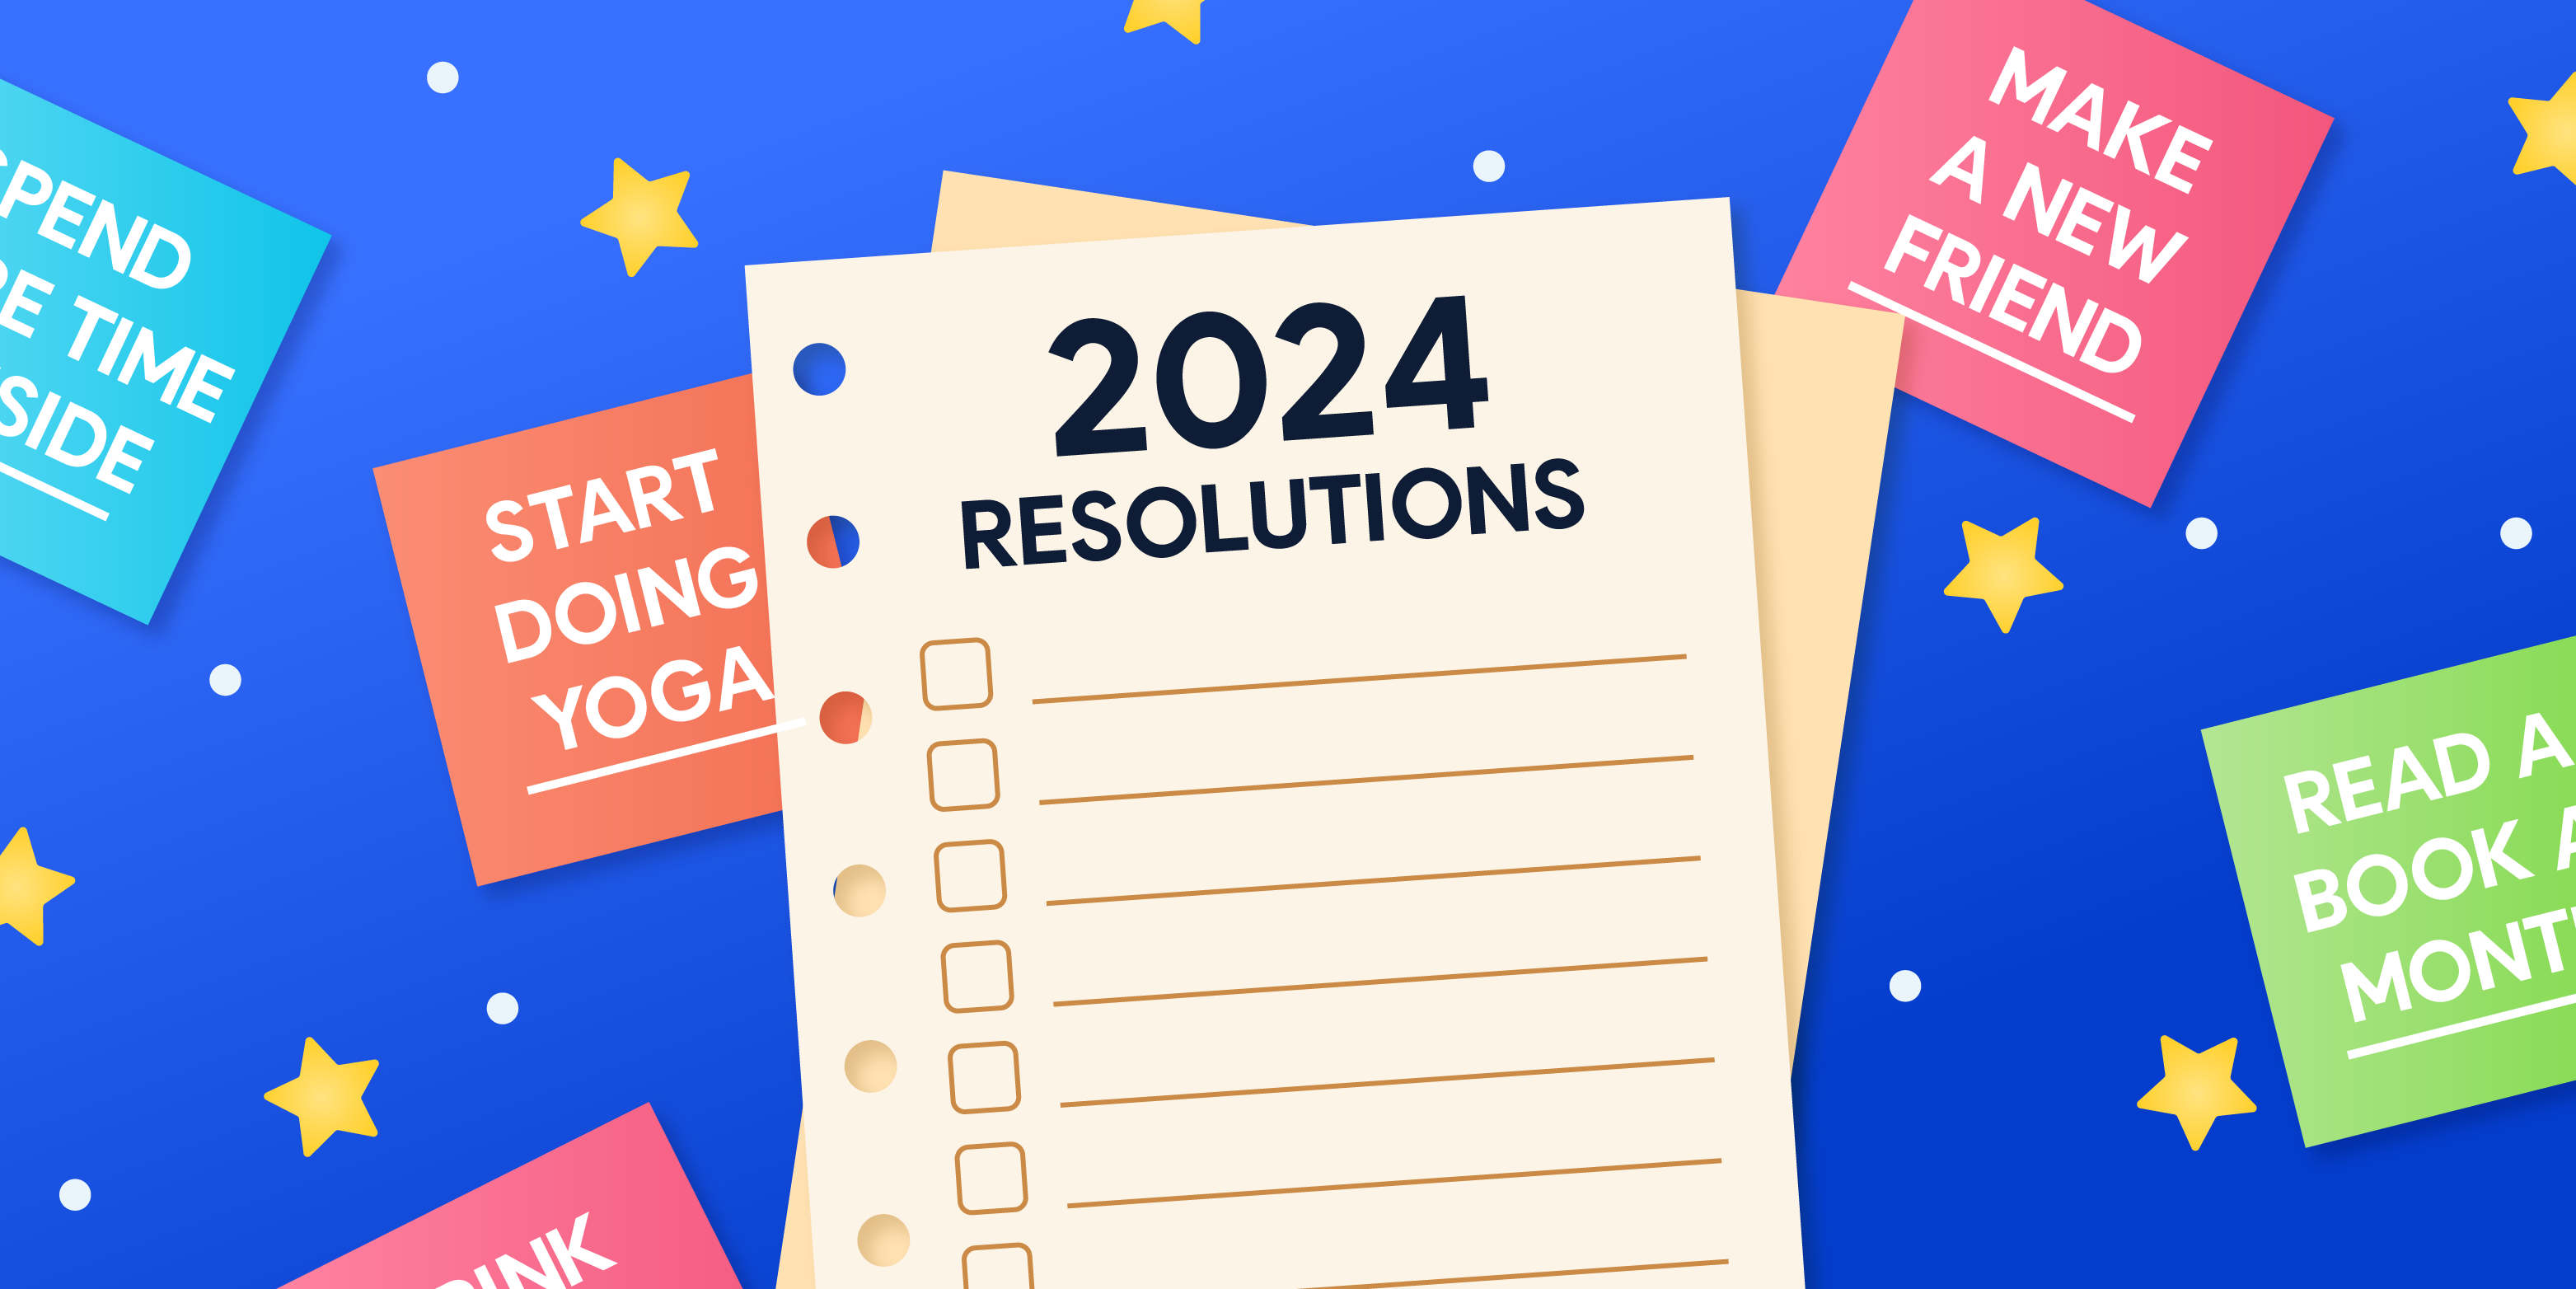 Do Your New Year's Resolutions Suck? Here's How To Make Resolutions Stick.